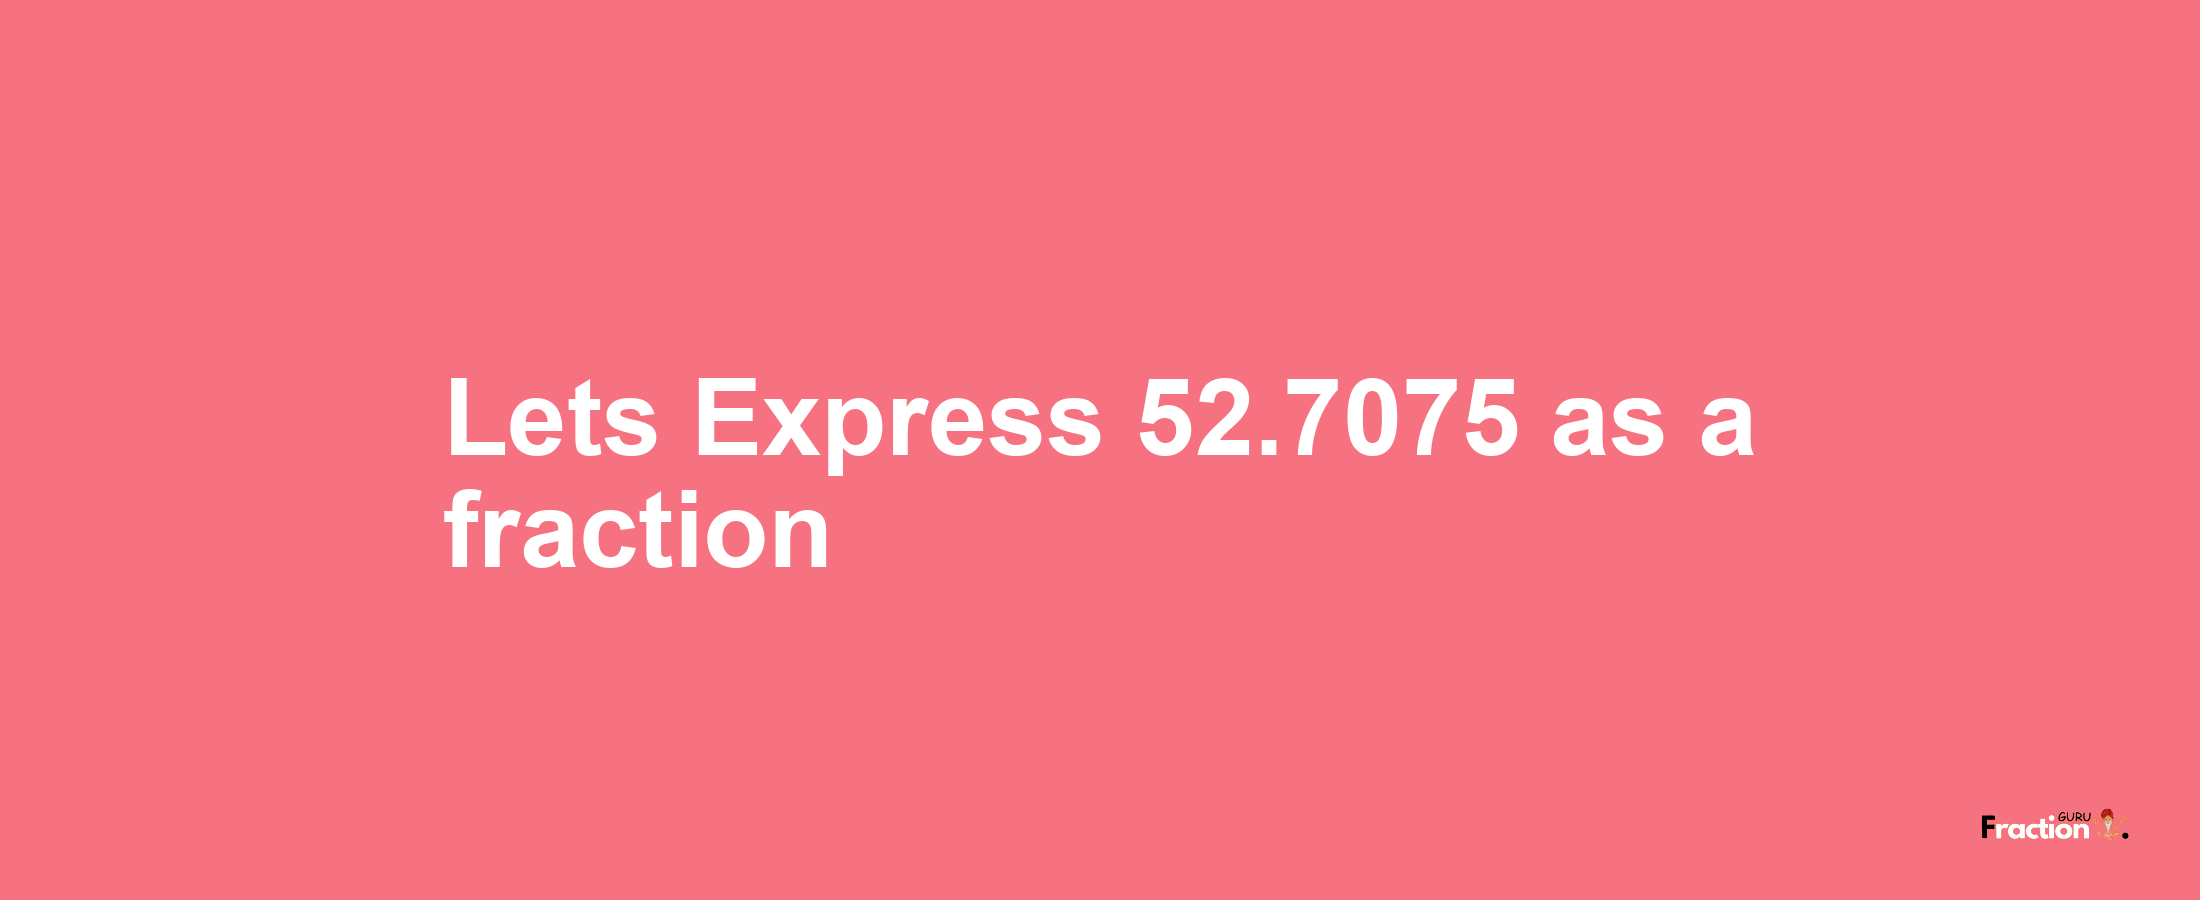 Lets Express 52.7075 as afraction